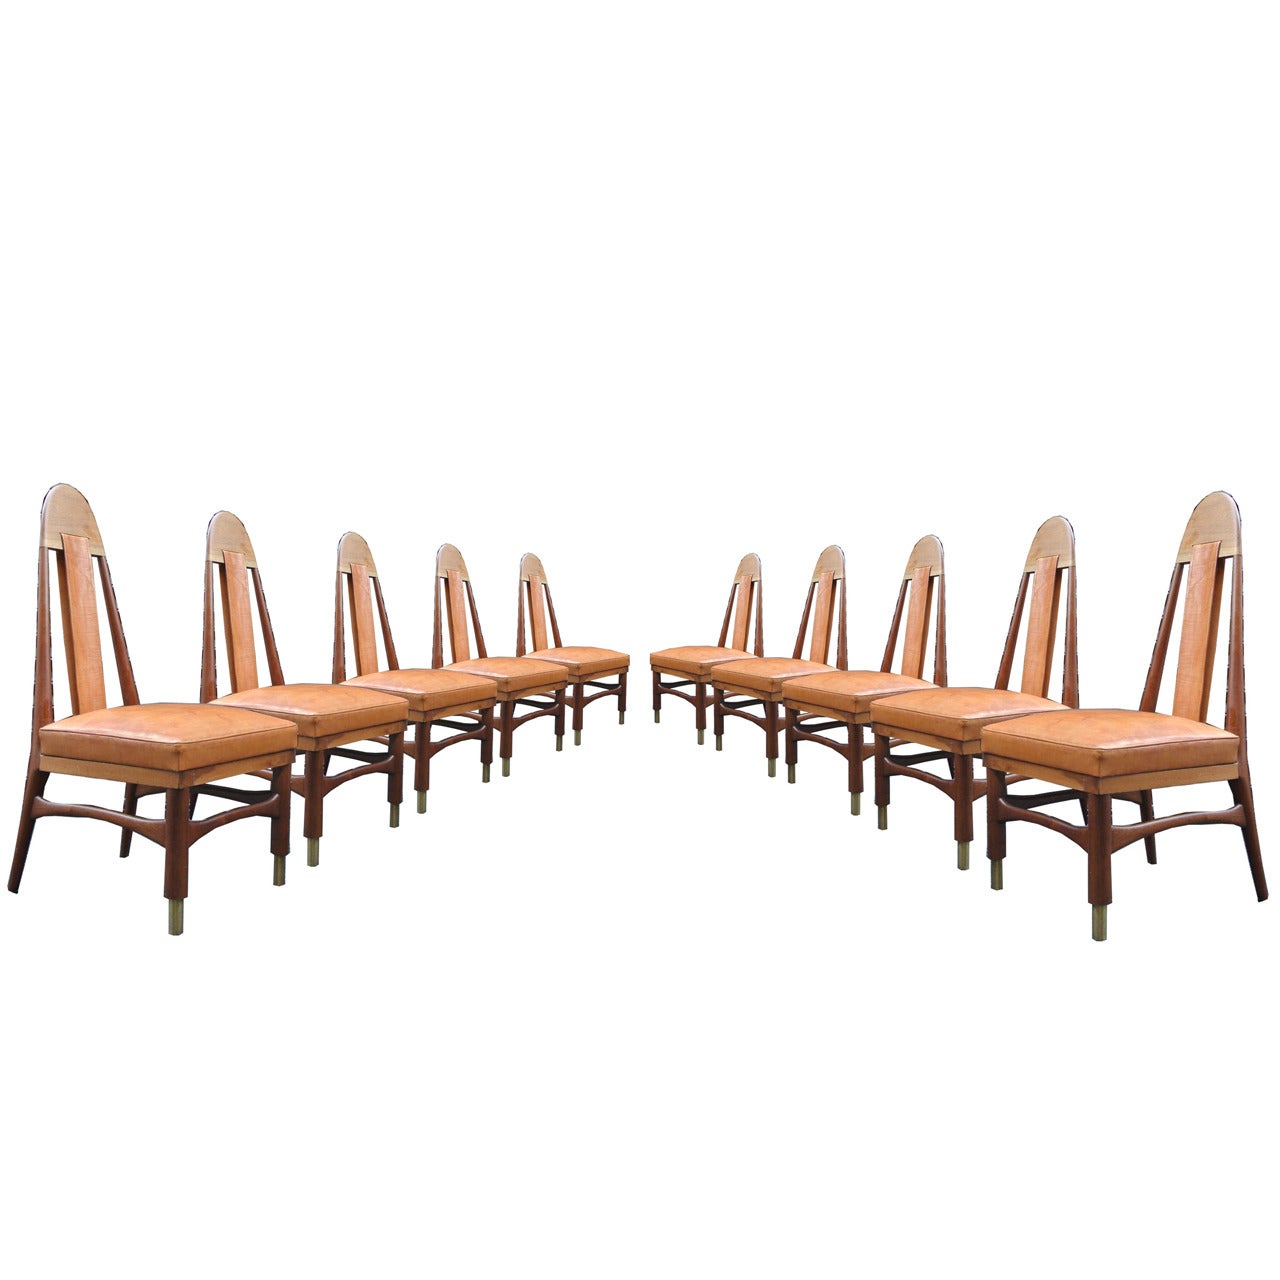 Set of Ten Dining Room Chairs For Sale